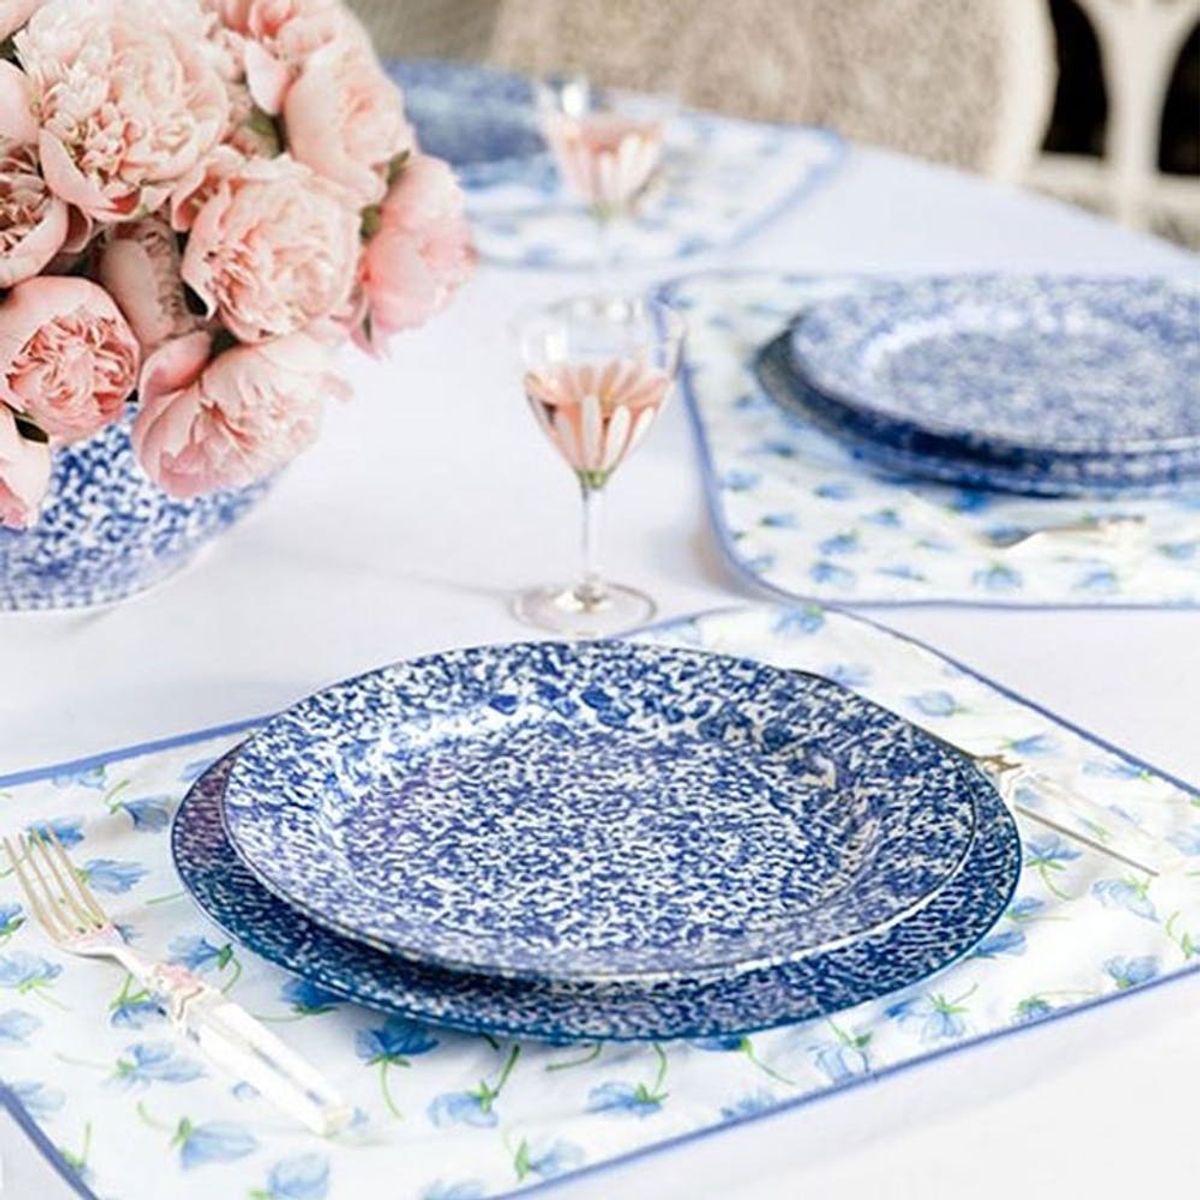 Here’s How to Register for the Most Exclusive Home Decor Wedding Gifts RN With Zola